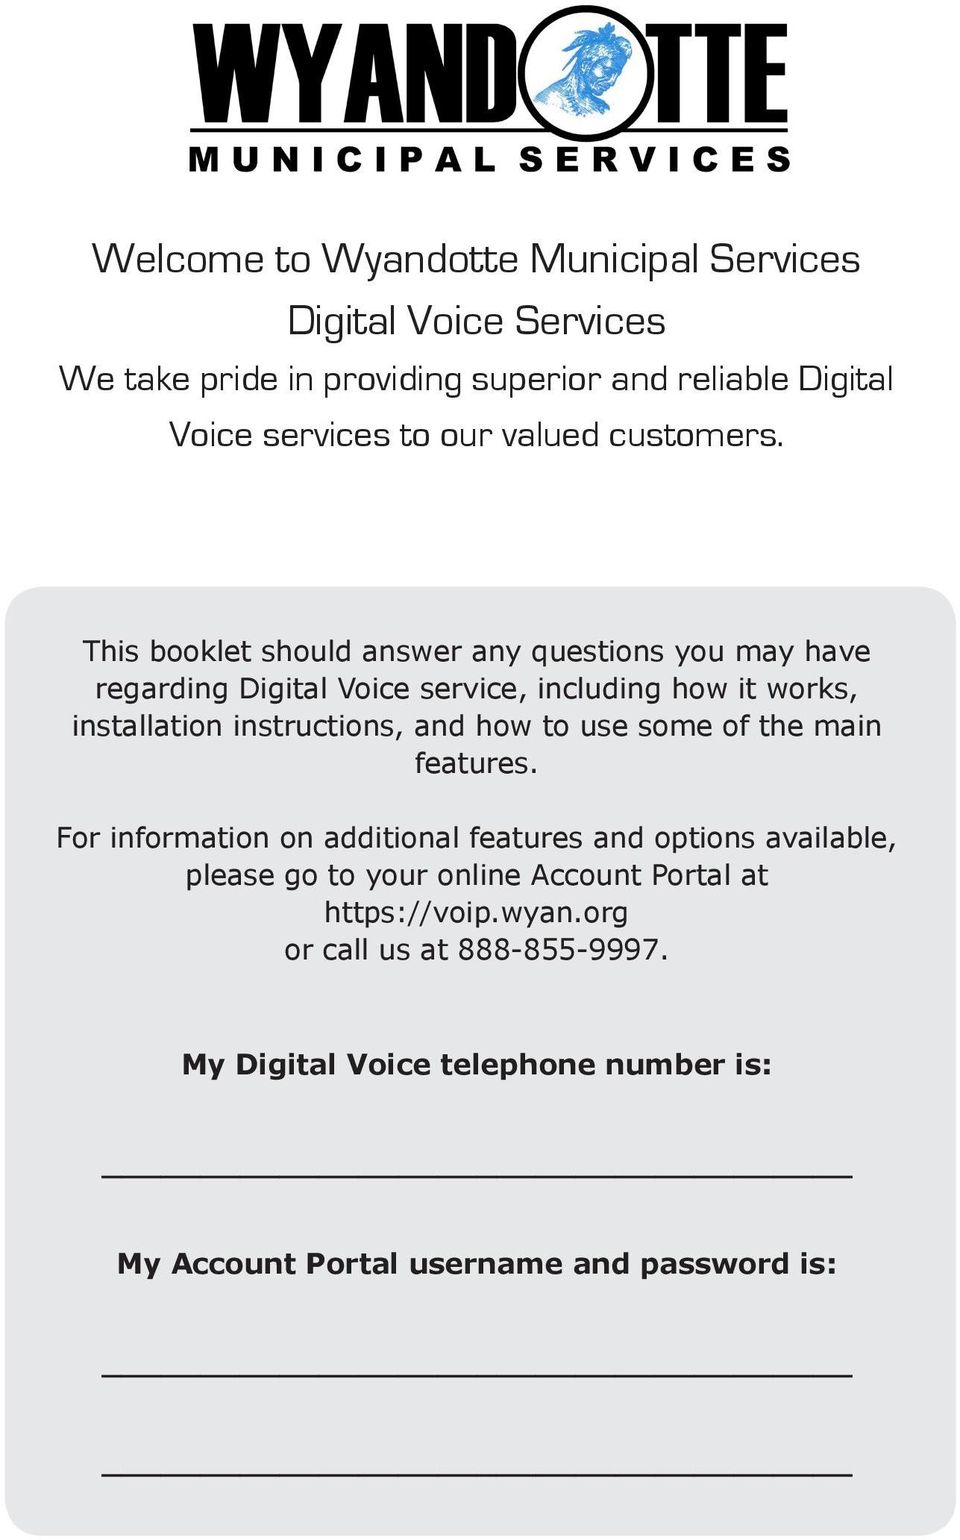 This booklet should answer any questions you may have regarding Digital Voice service, including how it works, installation instructions, and